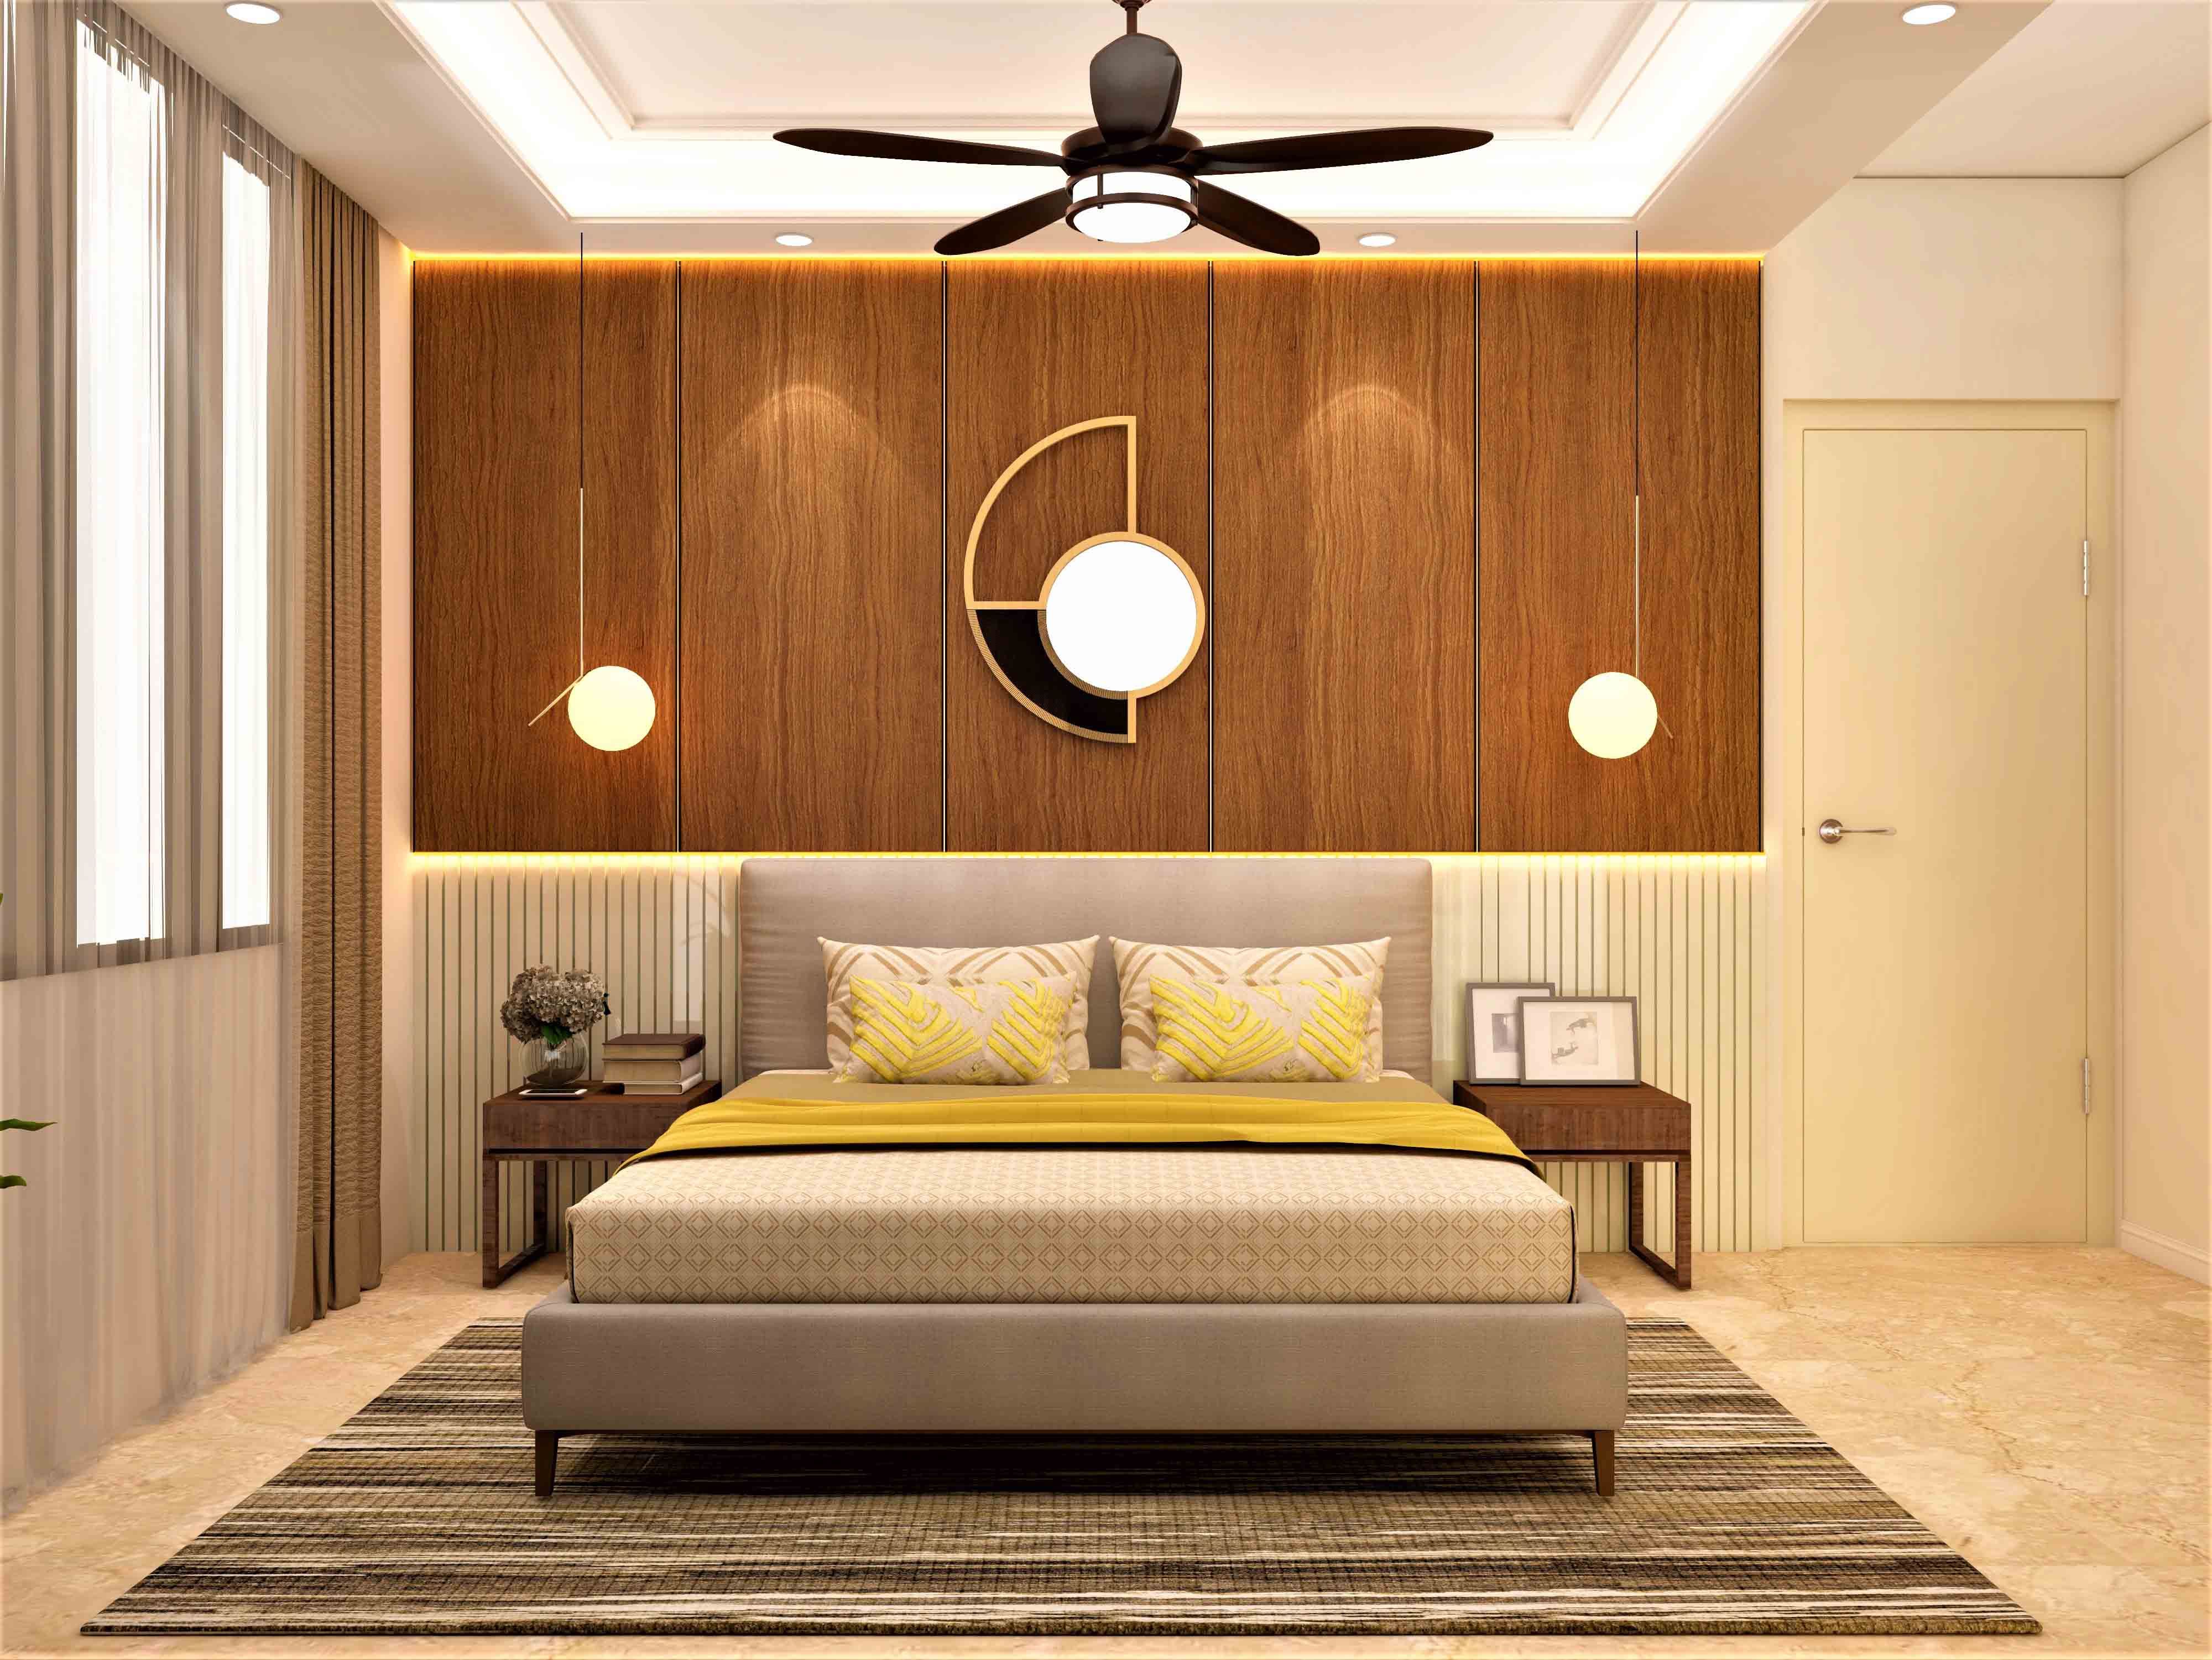 Elegant master bedroom design with vertical wooden panels and an accent wall - Beautiful Homes